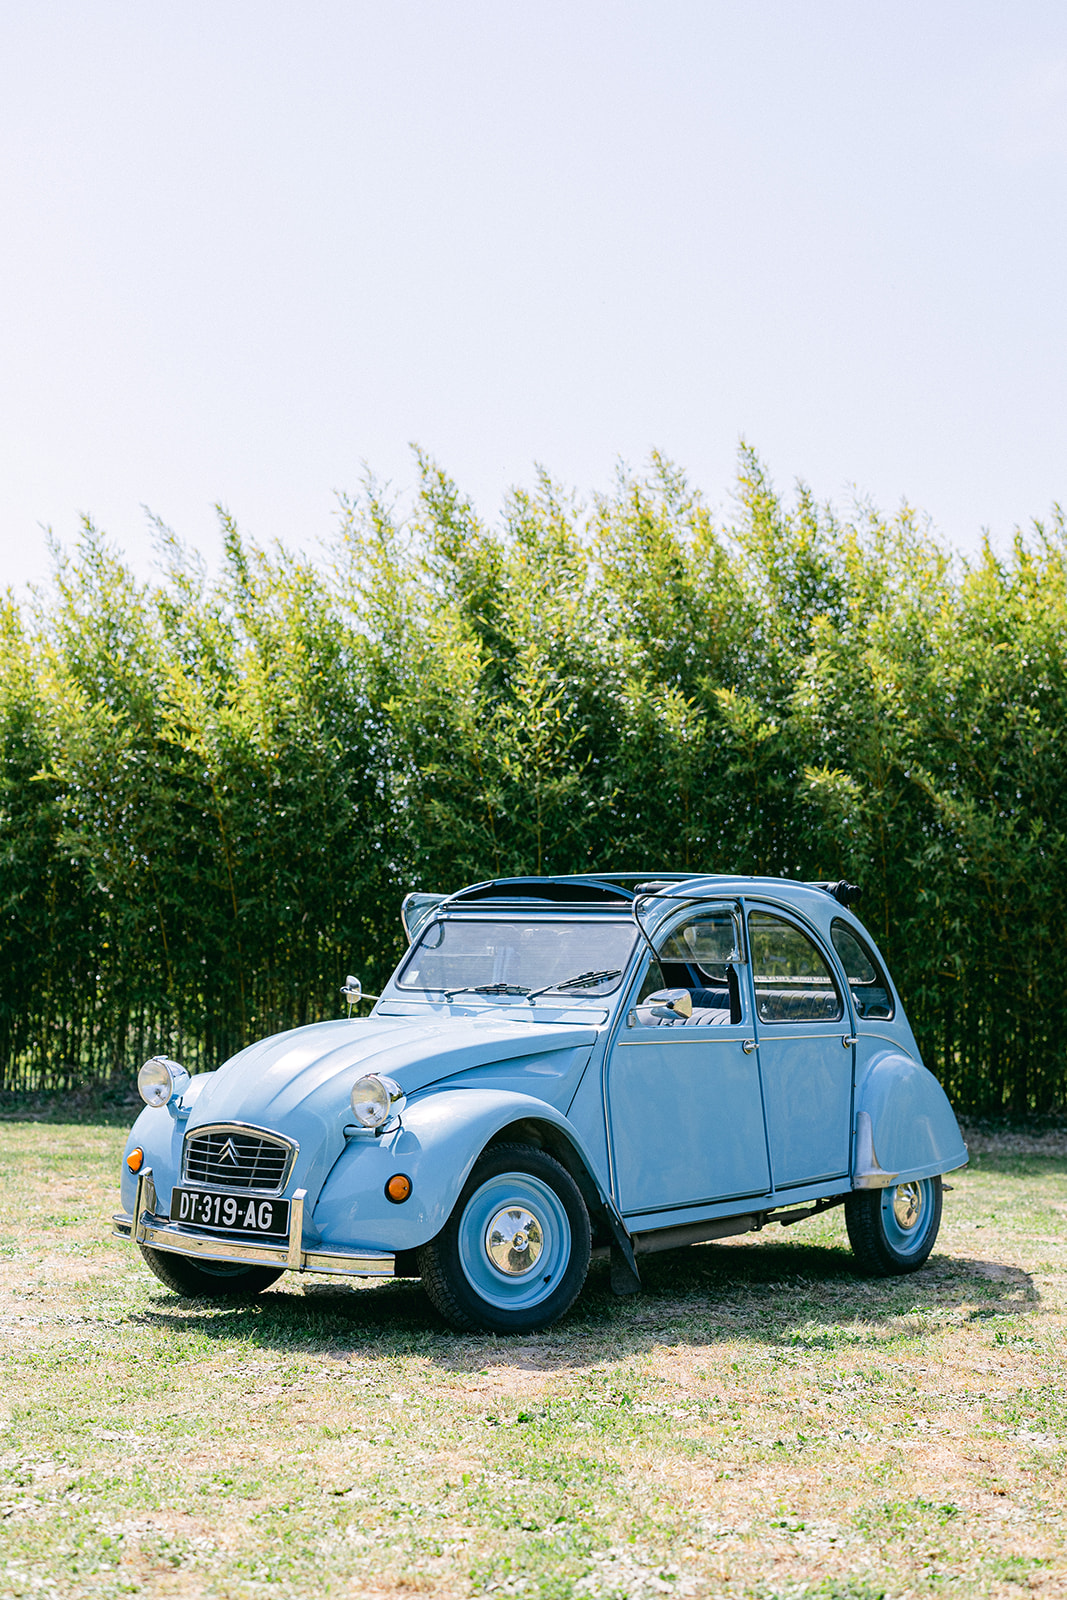 A photopraph of one of the vehicles available for touring at Provence Classics.